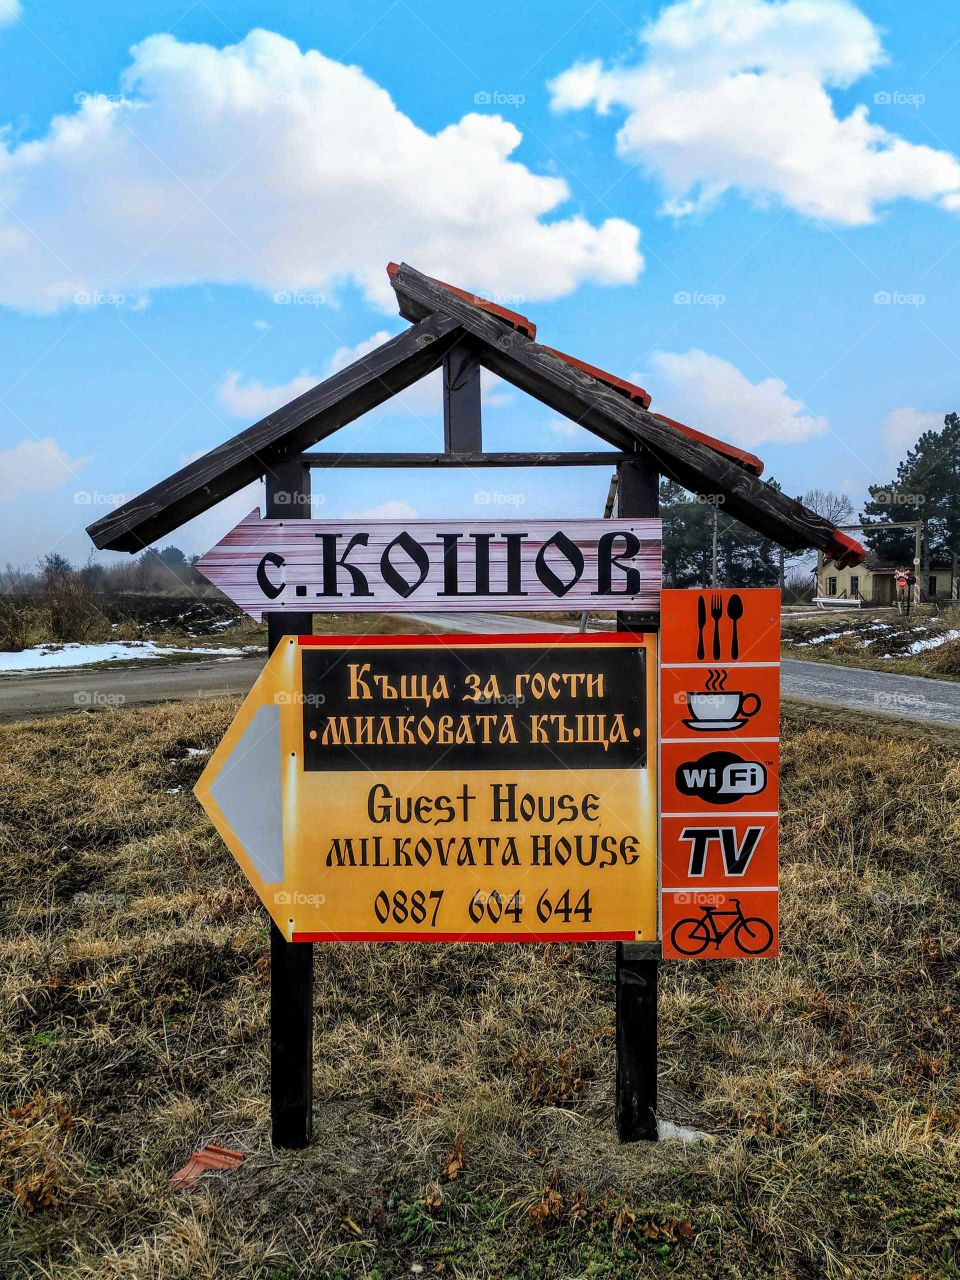 A sign of the town Koshov